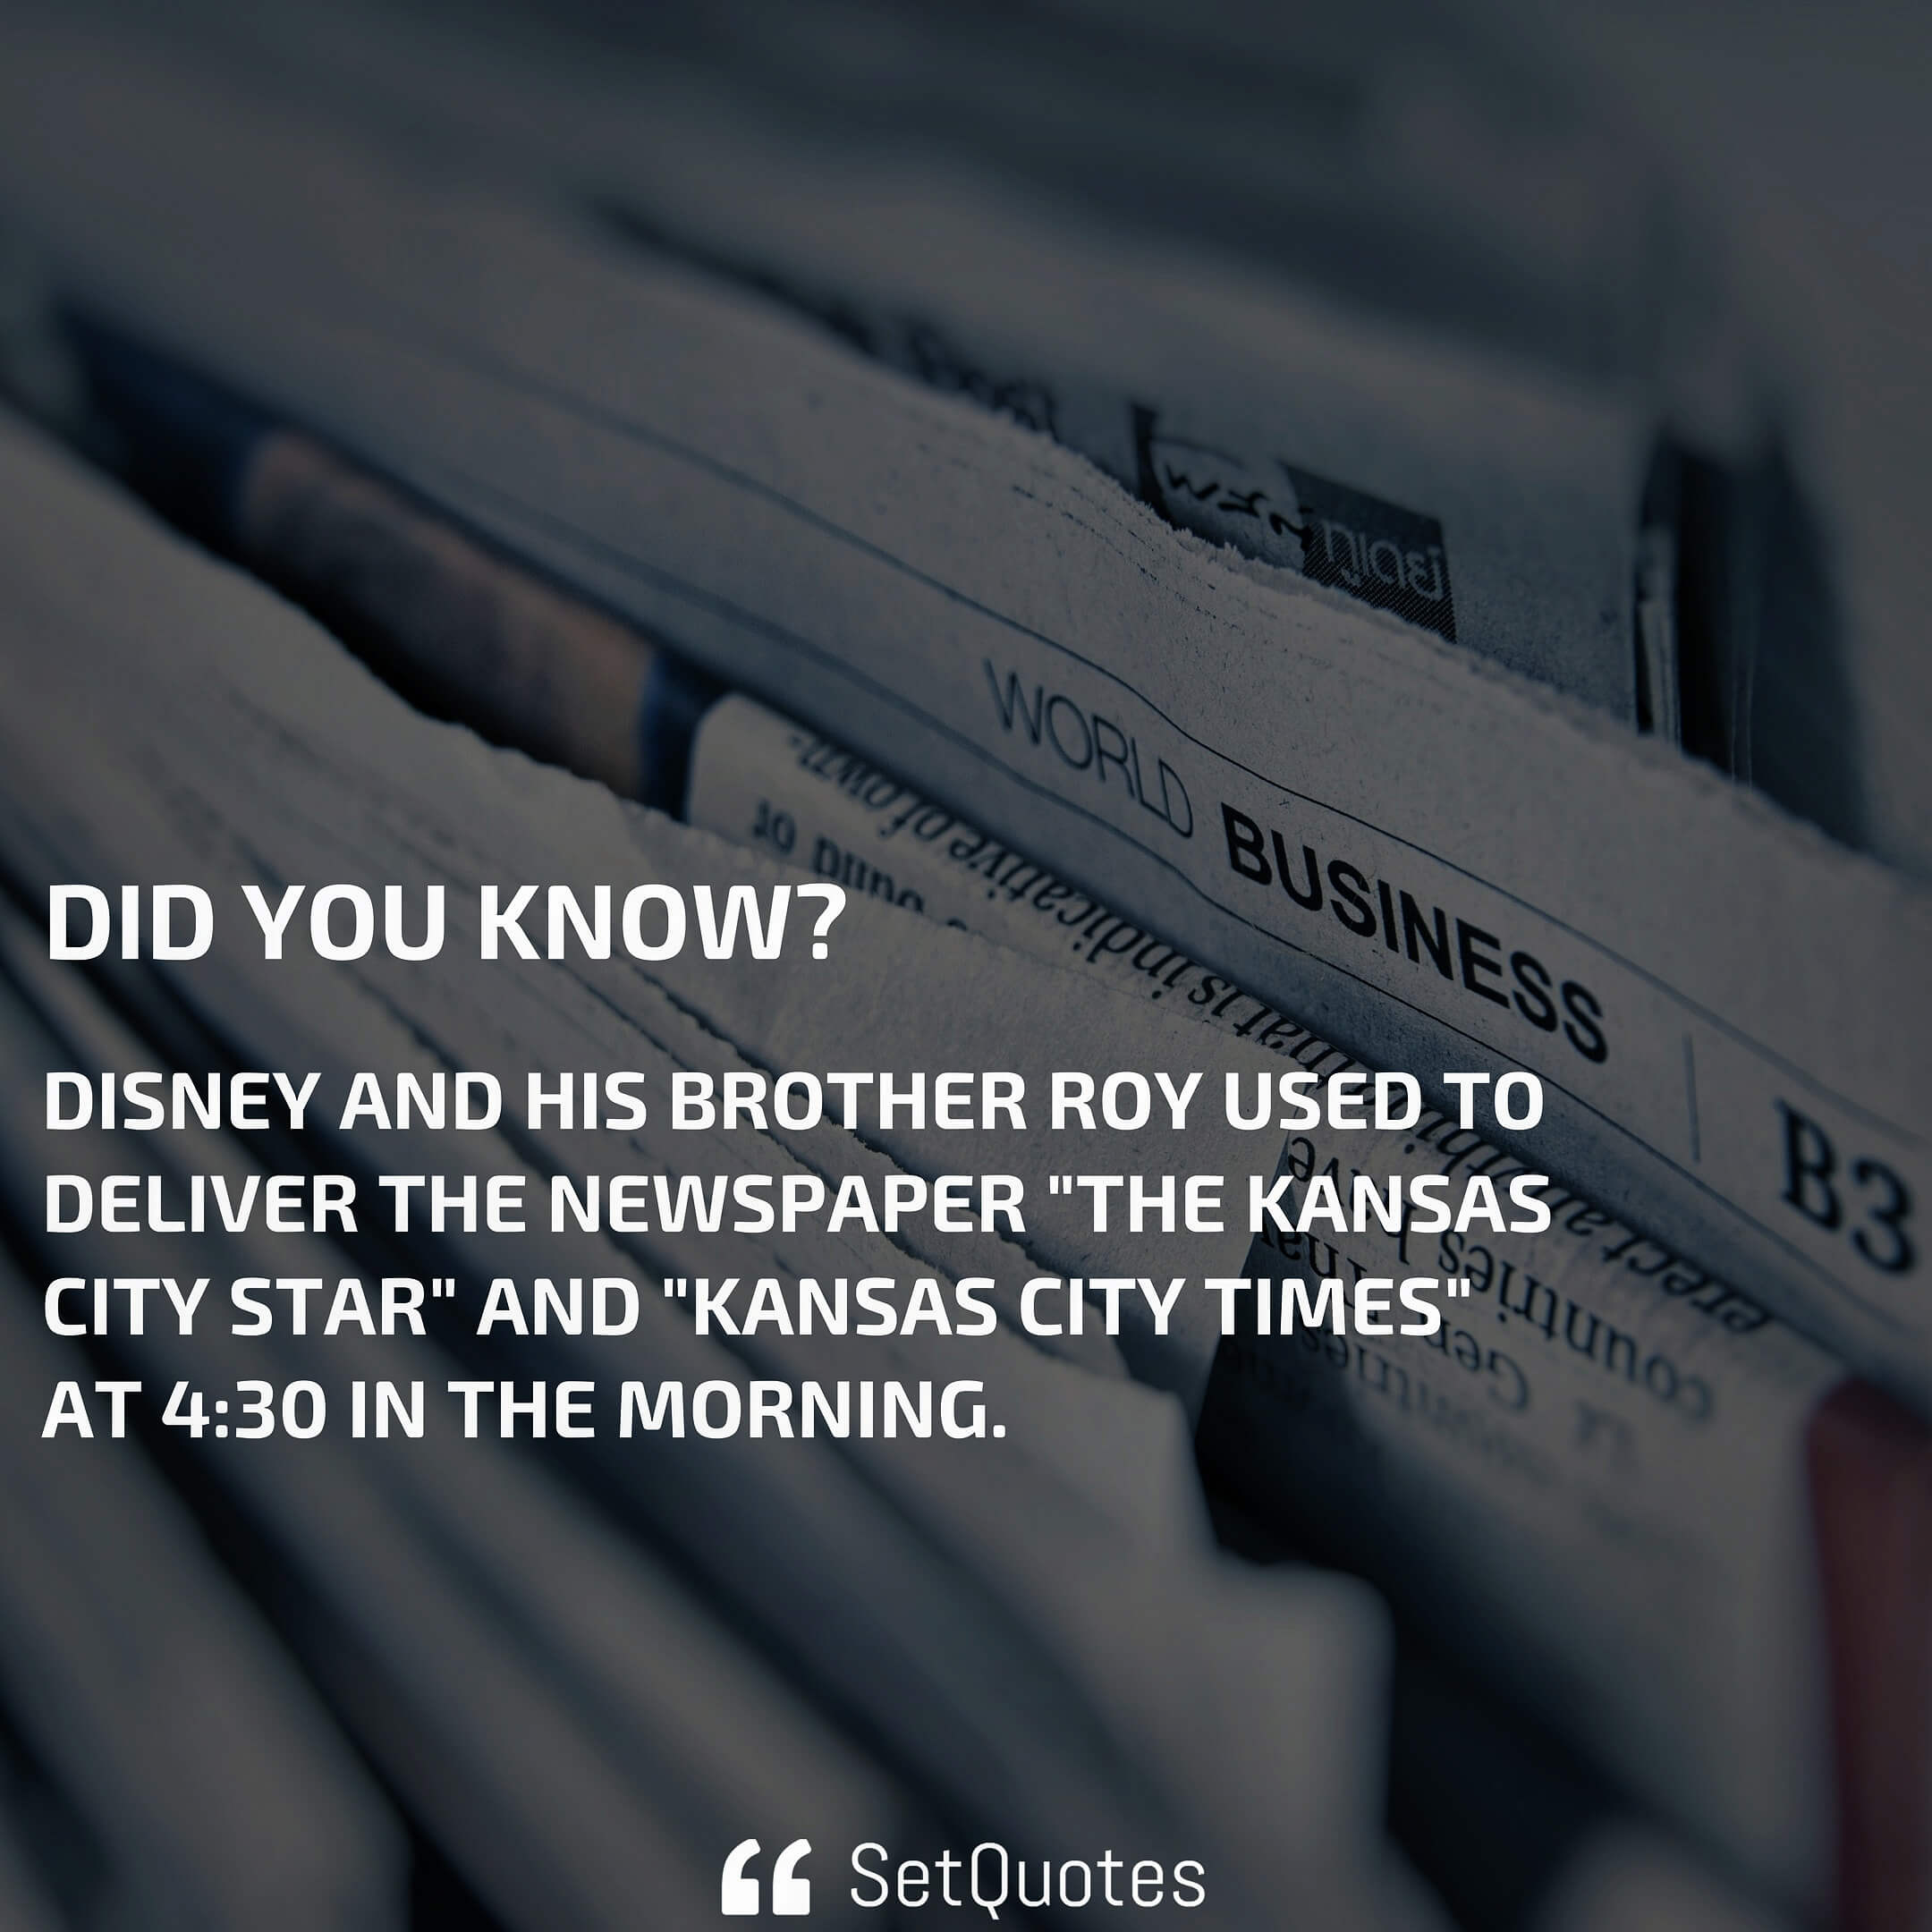 Disney and his brother Roy used to deliver the newspaper "The Kansas City Star" and "Kansas City Times" at 4:30 in the morning.